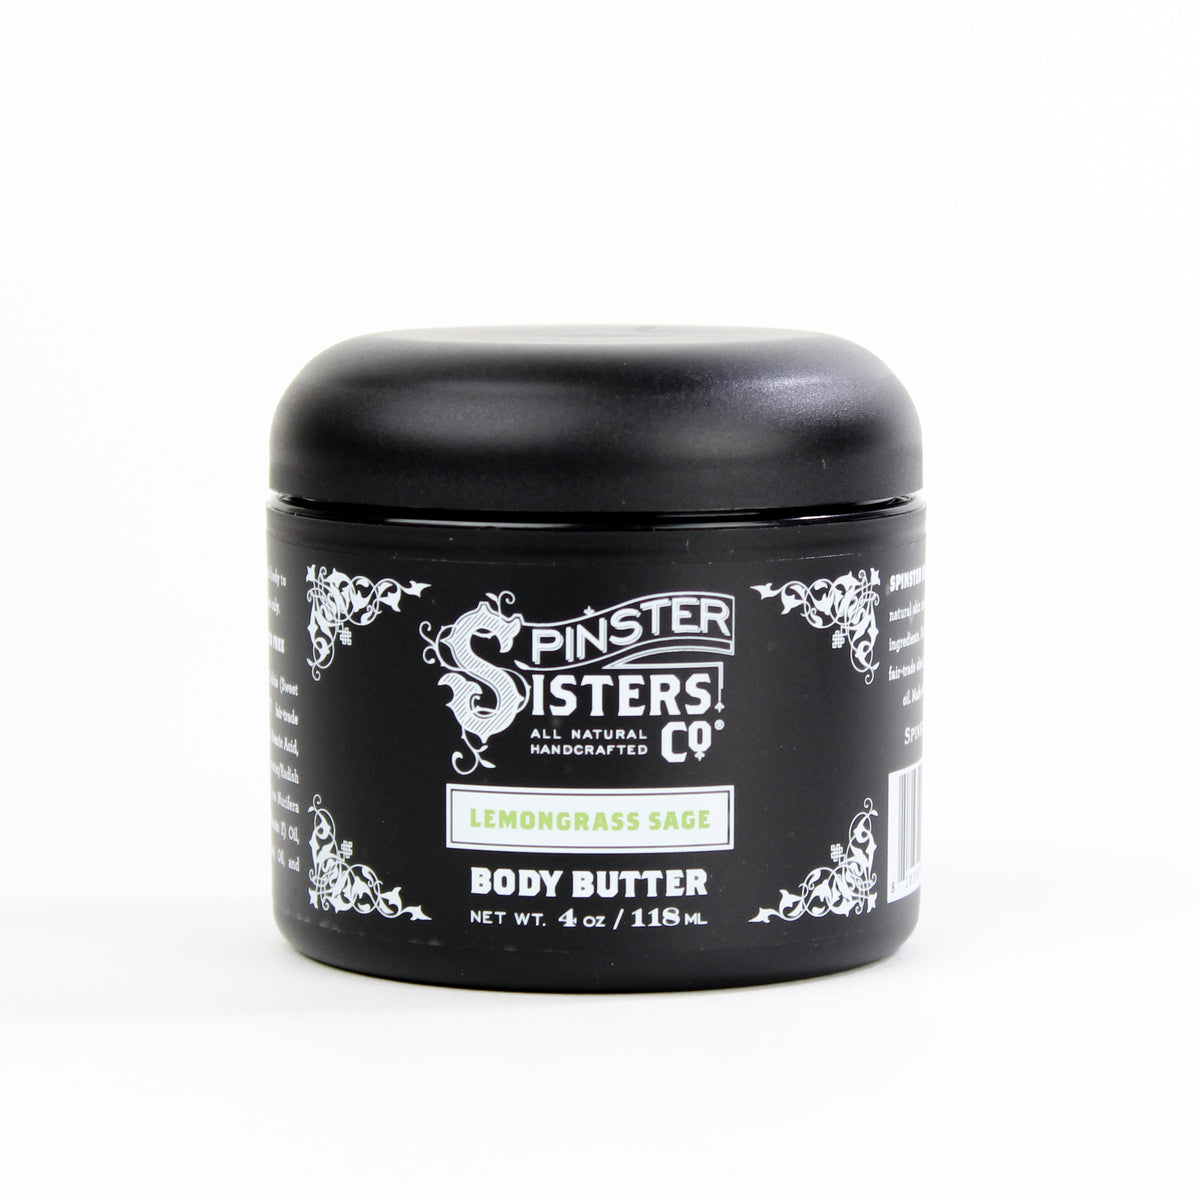 A black jar of Spinster Sisters Body Butter 4oz Jar - Lemongrass Sage with shea butter against a white background. The label features white and silver decorative accents and text.